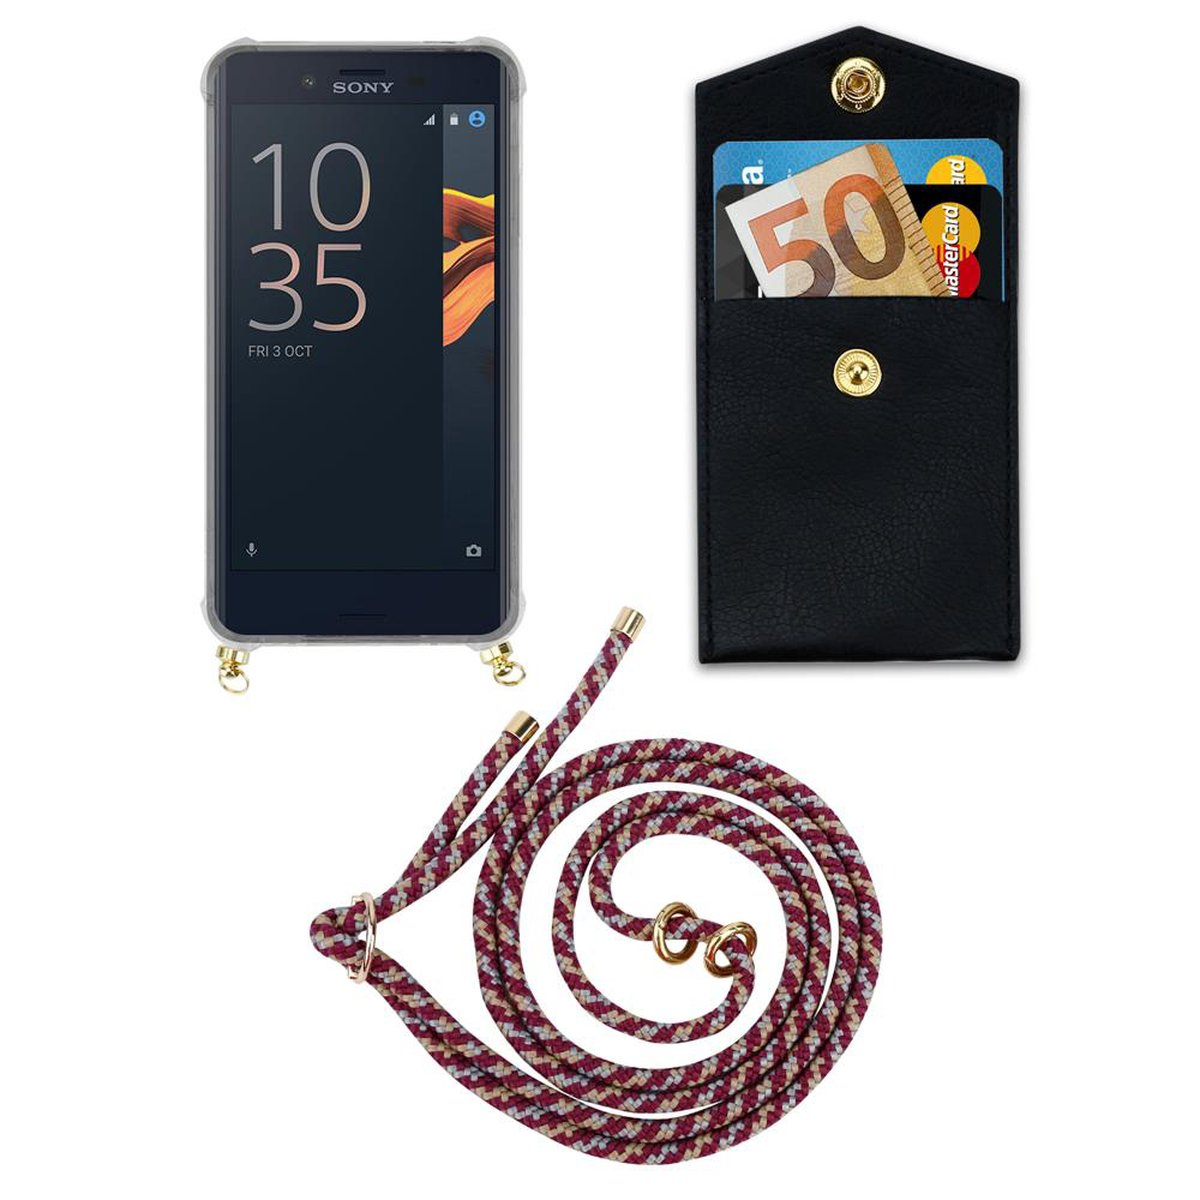 Hülle, Kette GELB Ringen, Backcover, Xperia COMPACT, und abnehmbarer Sony, Handy ROT mit Gold Band WEIß X CADORABO Kordel